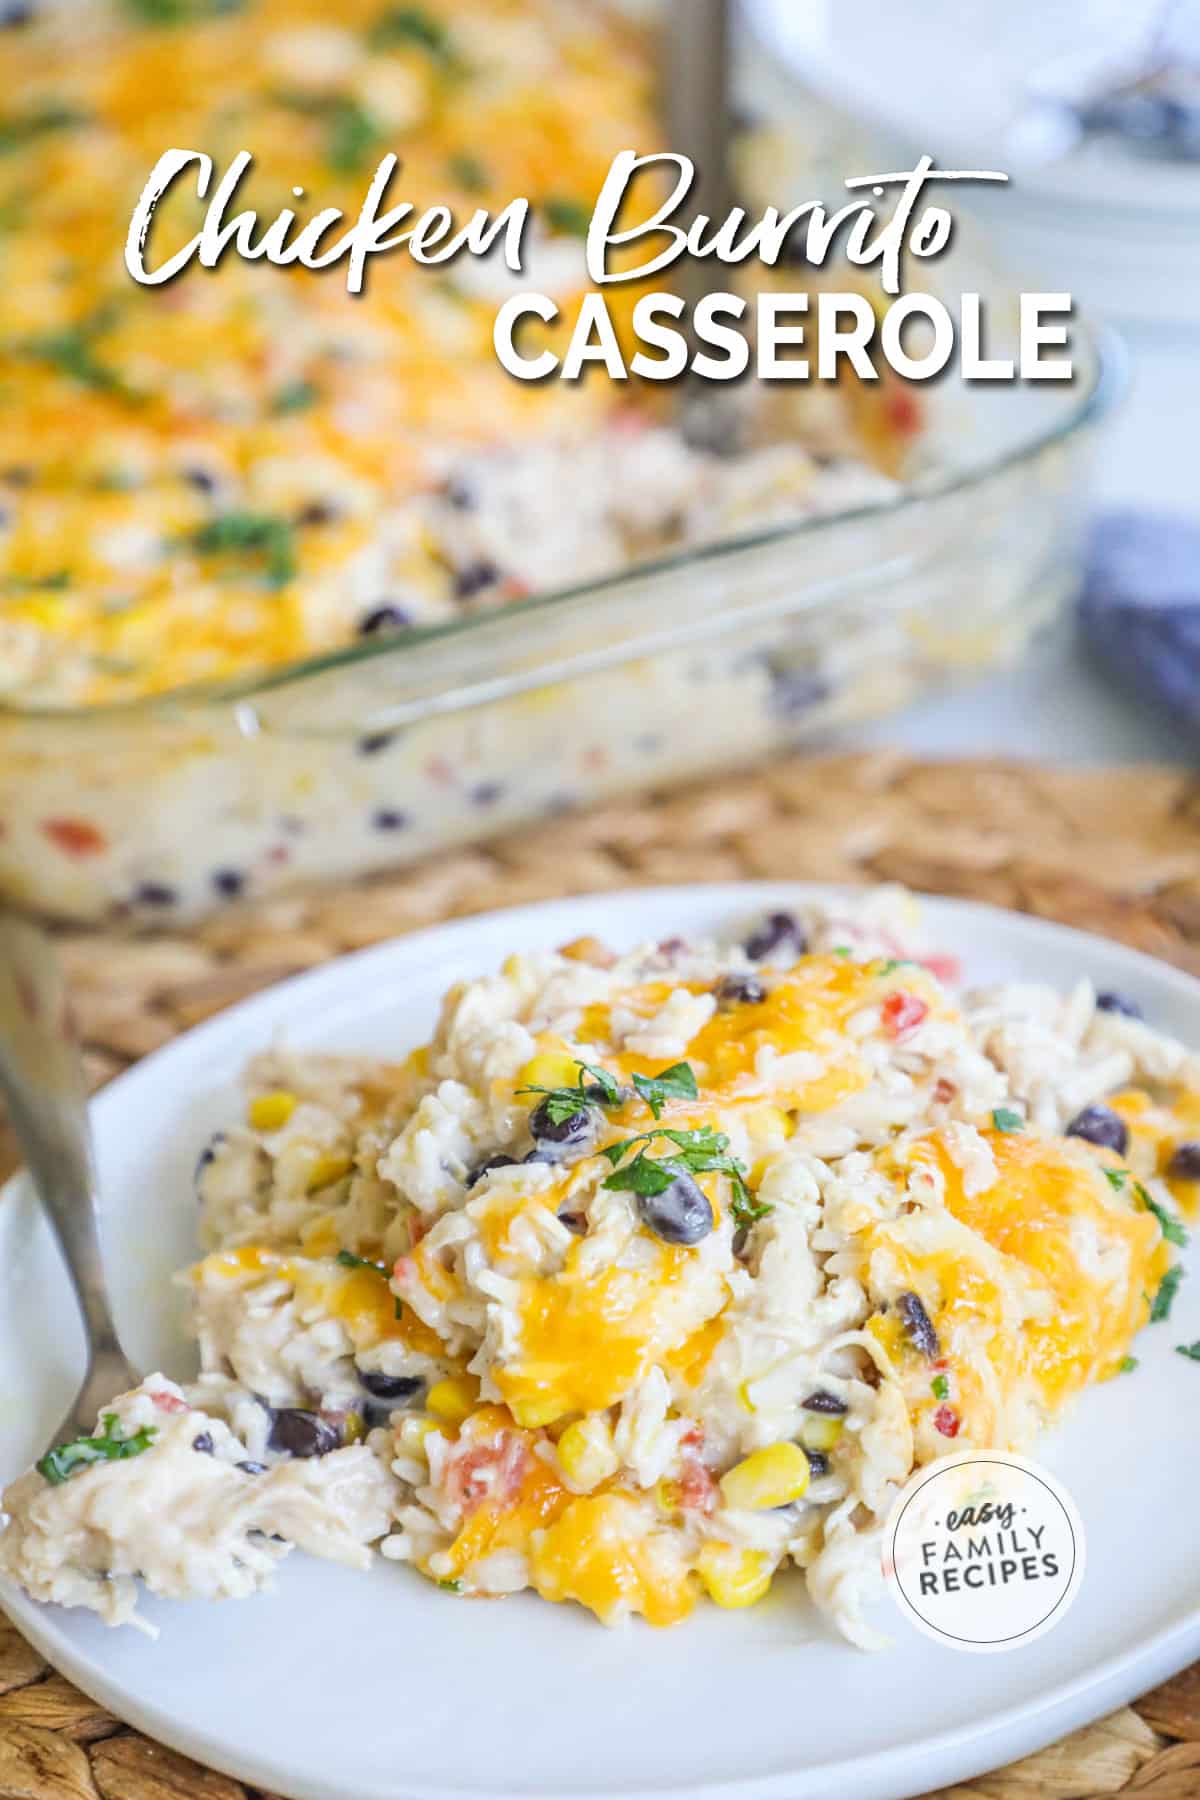 Chicken burrito casserole on a plate served next to the whole casserole dish.